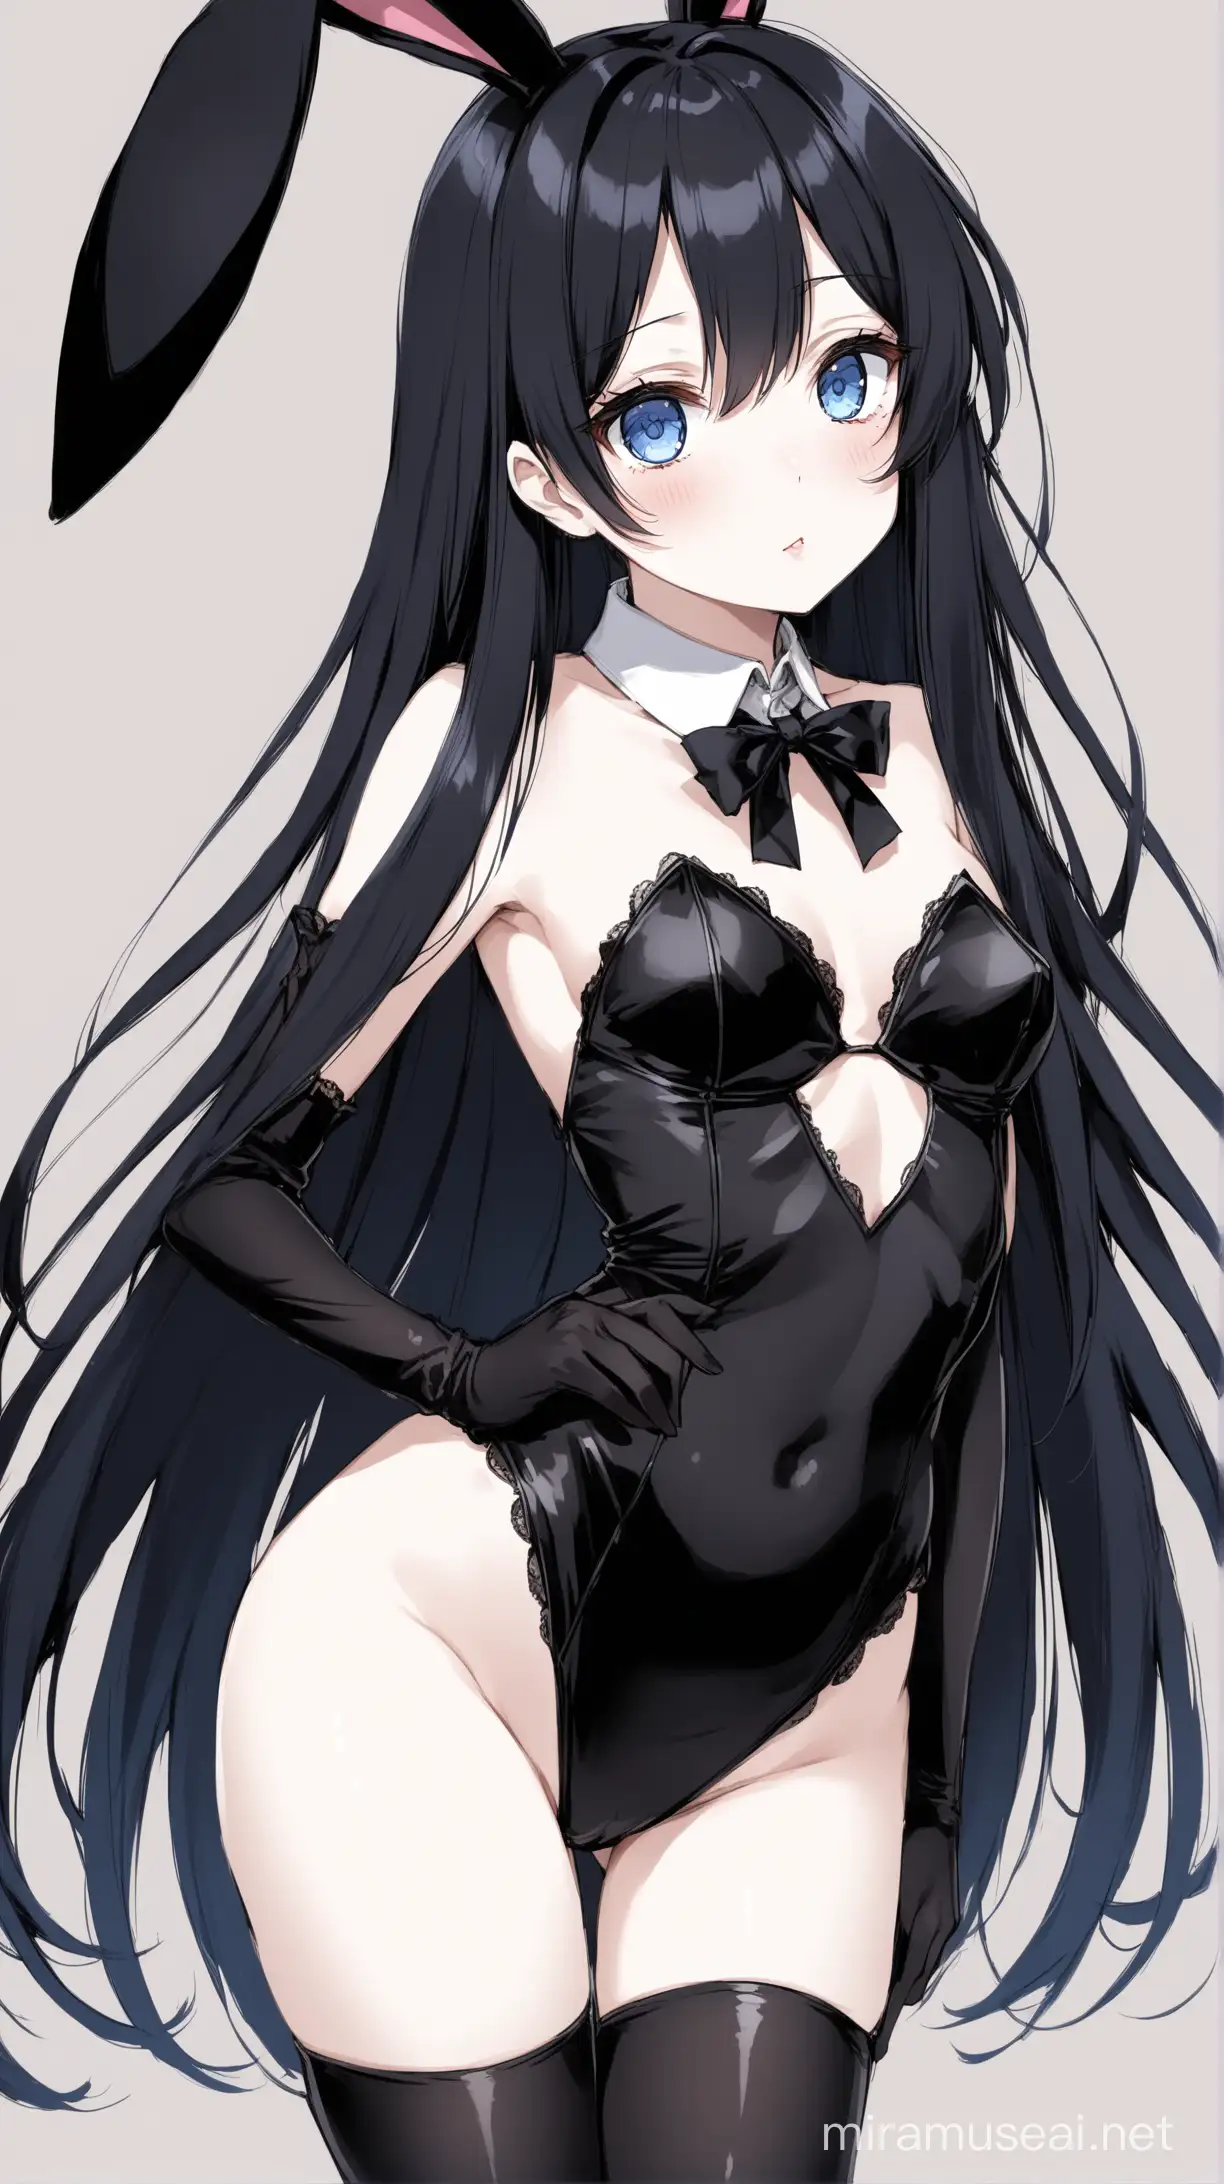 AnimeInspired Black Bunny Costumed Woman with Long Dark Hair and Blue Eyes